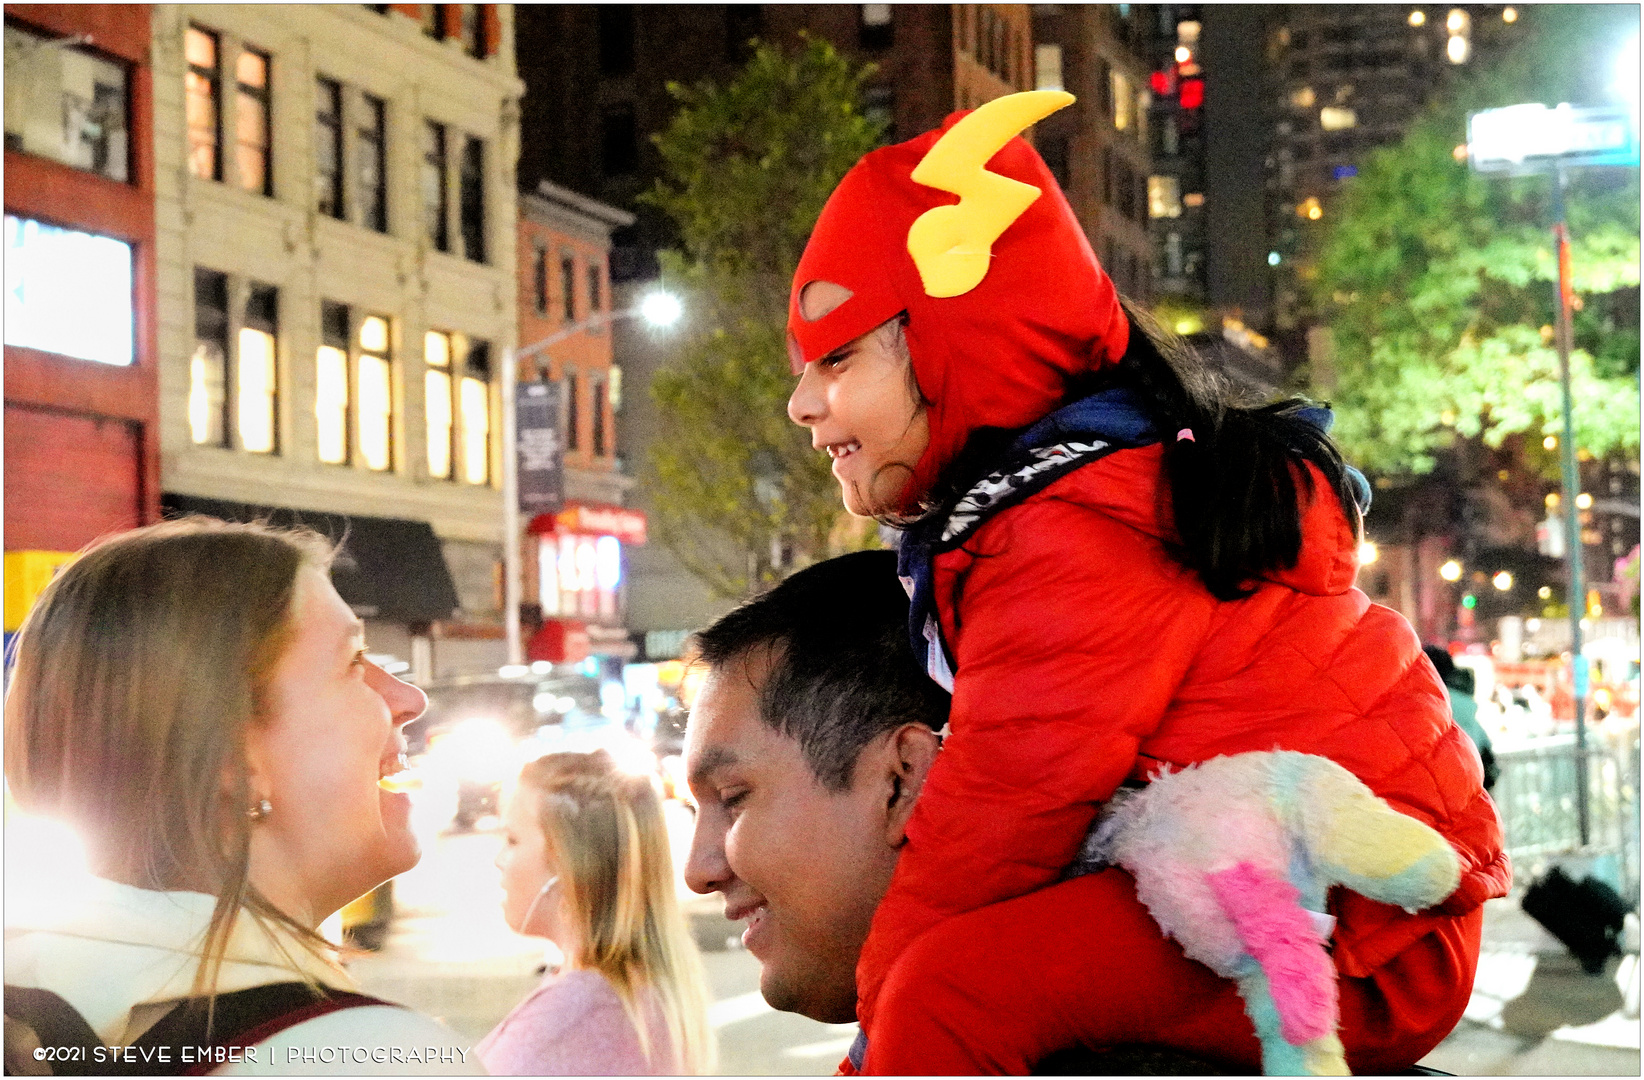 Super-Heroine in Herald Square - A New York Moment